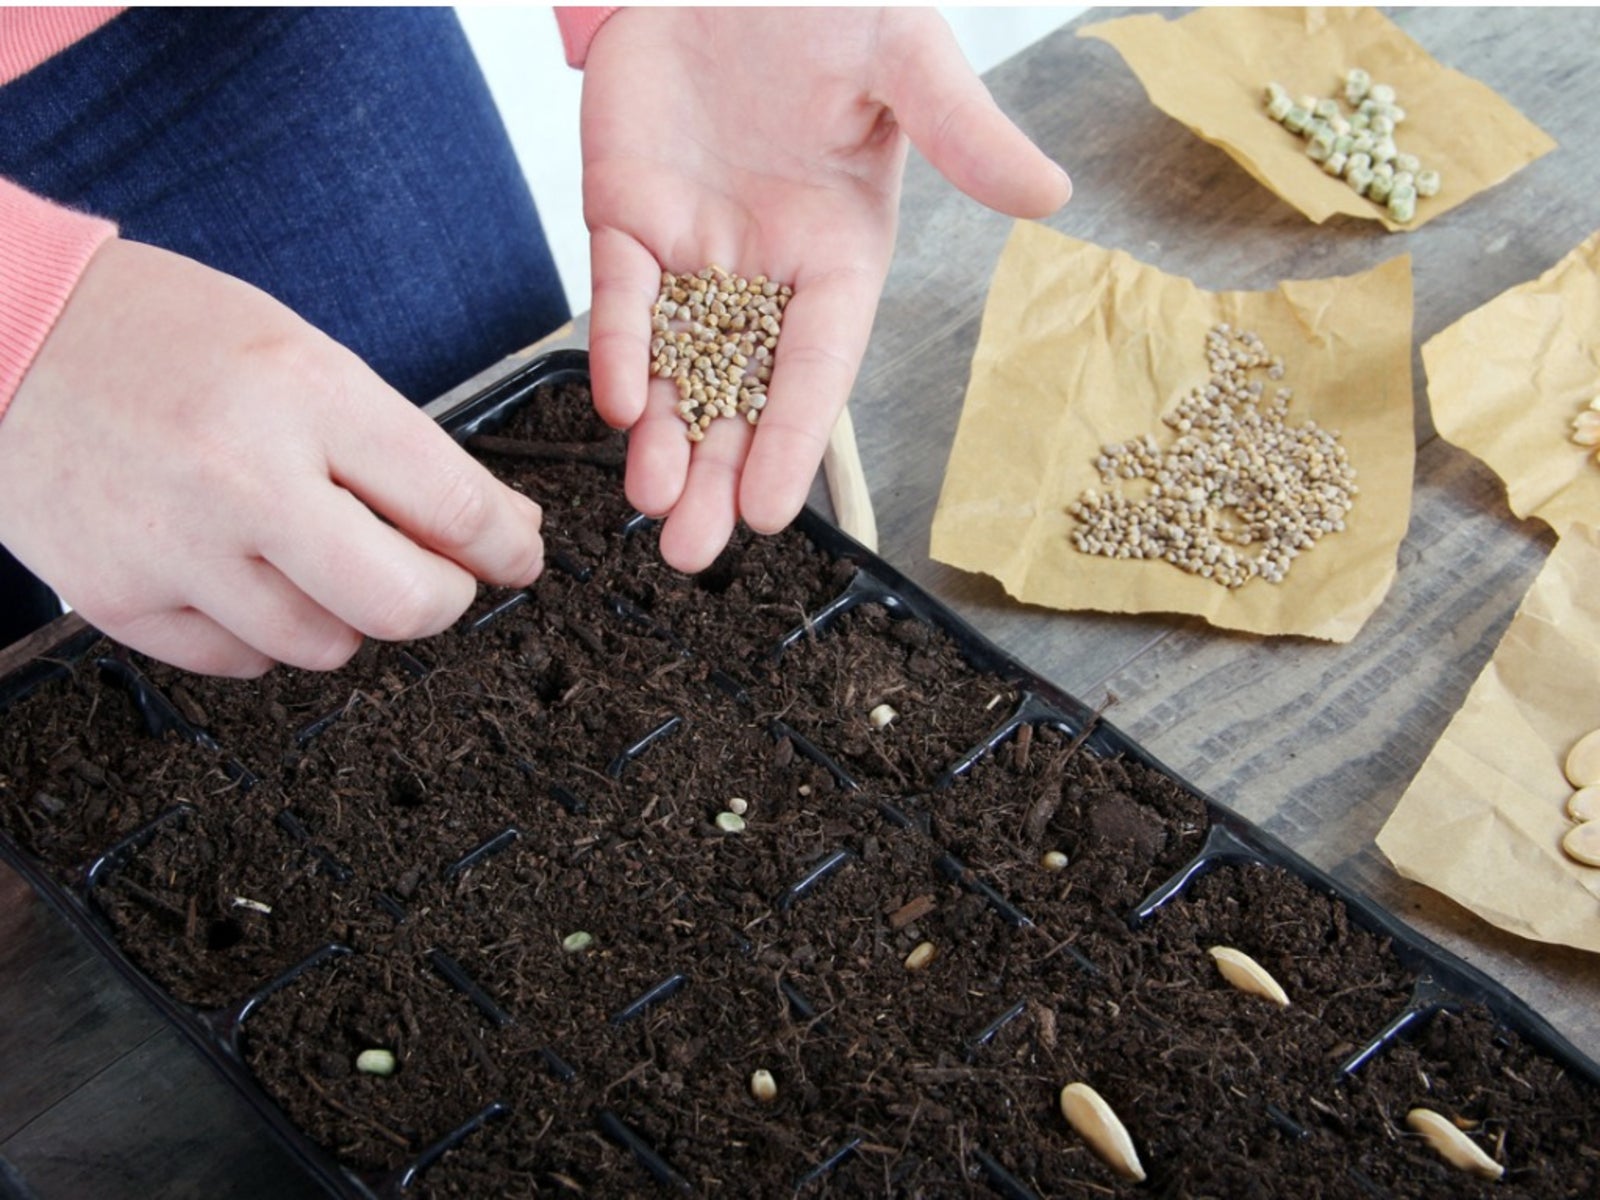 Hands planting seeds in a seed starting tray